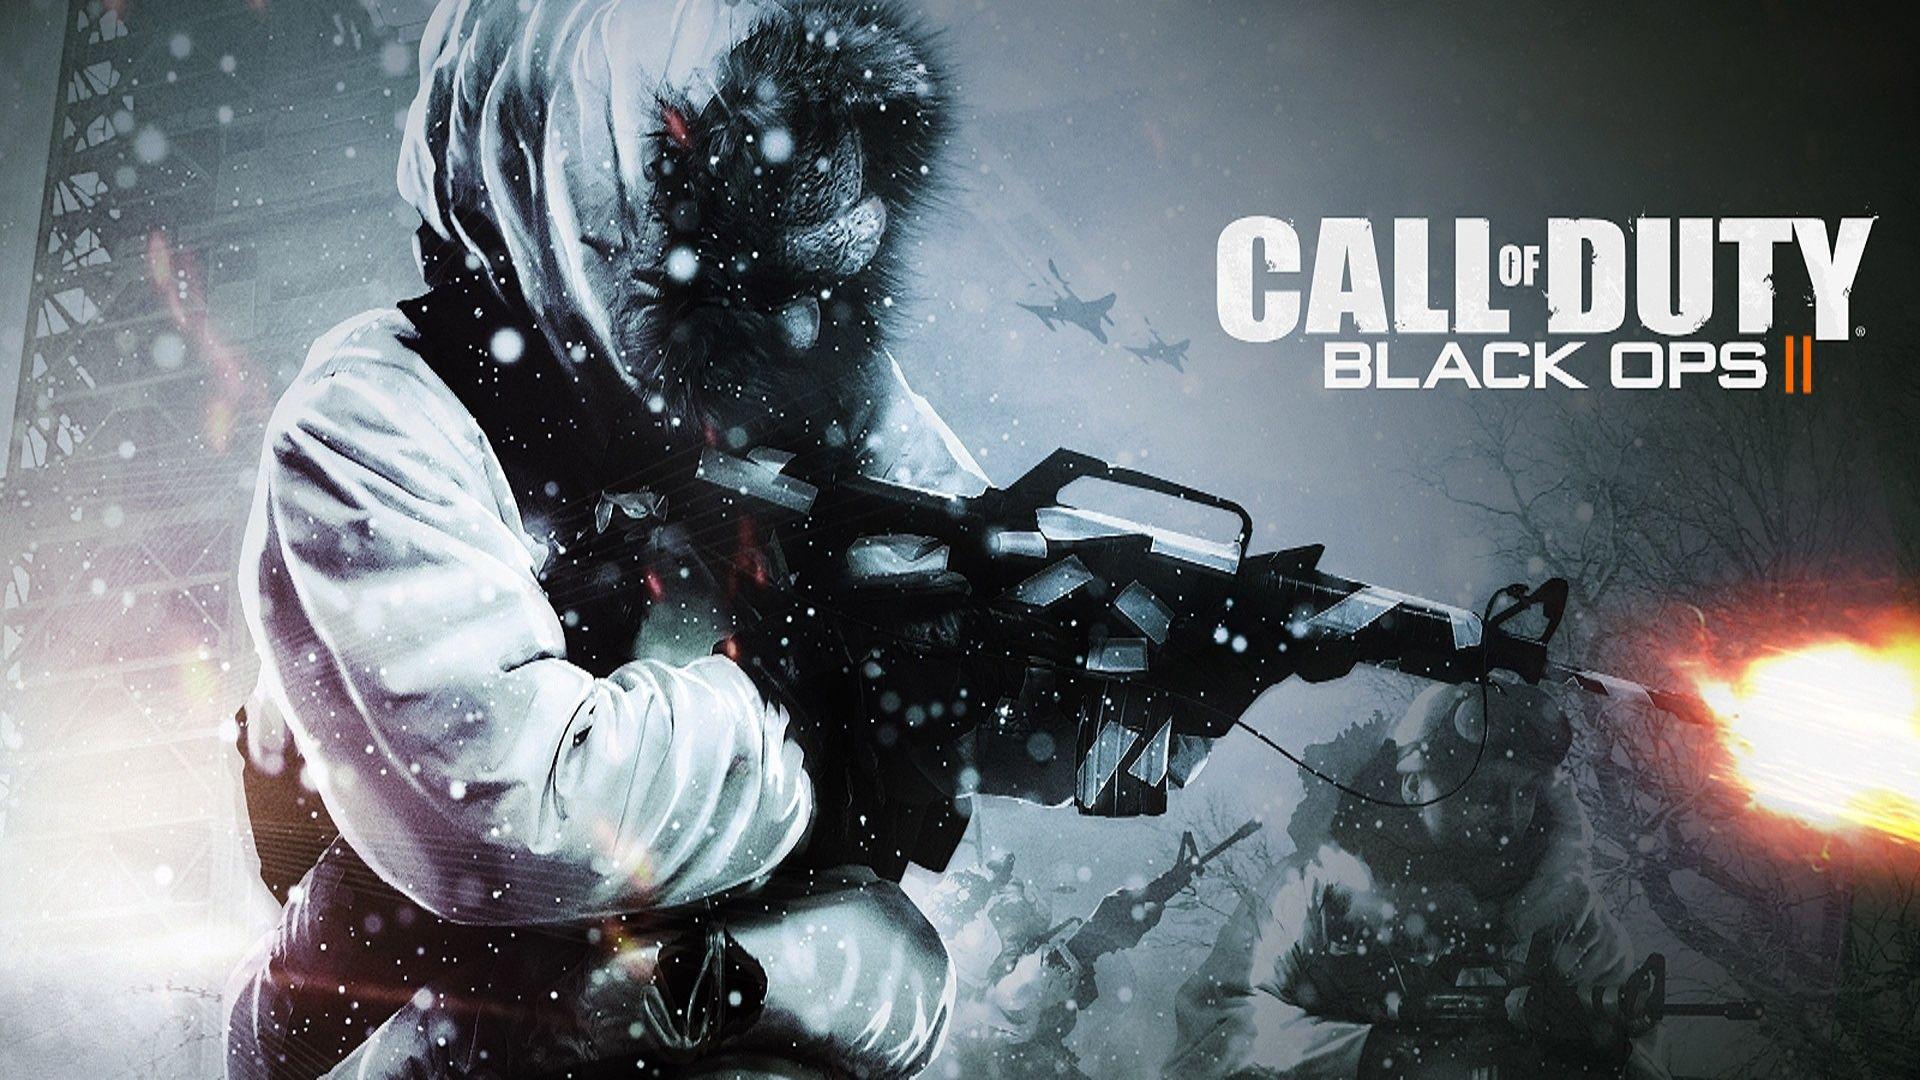 call of duty black ops 2 wallpaper. Your Geeky Wallpaper